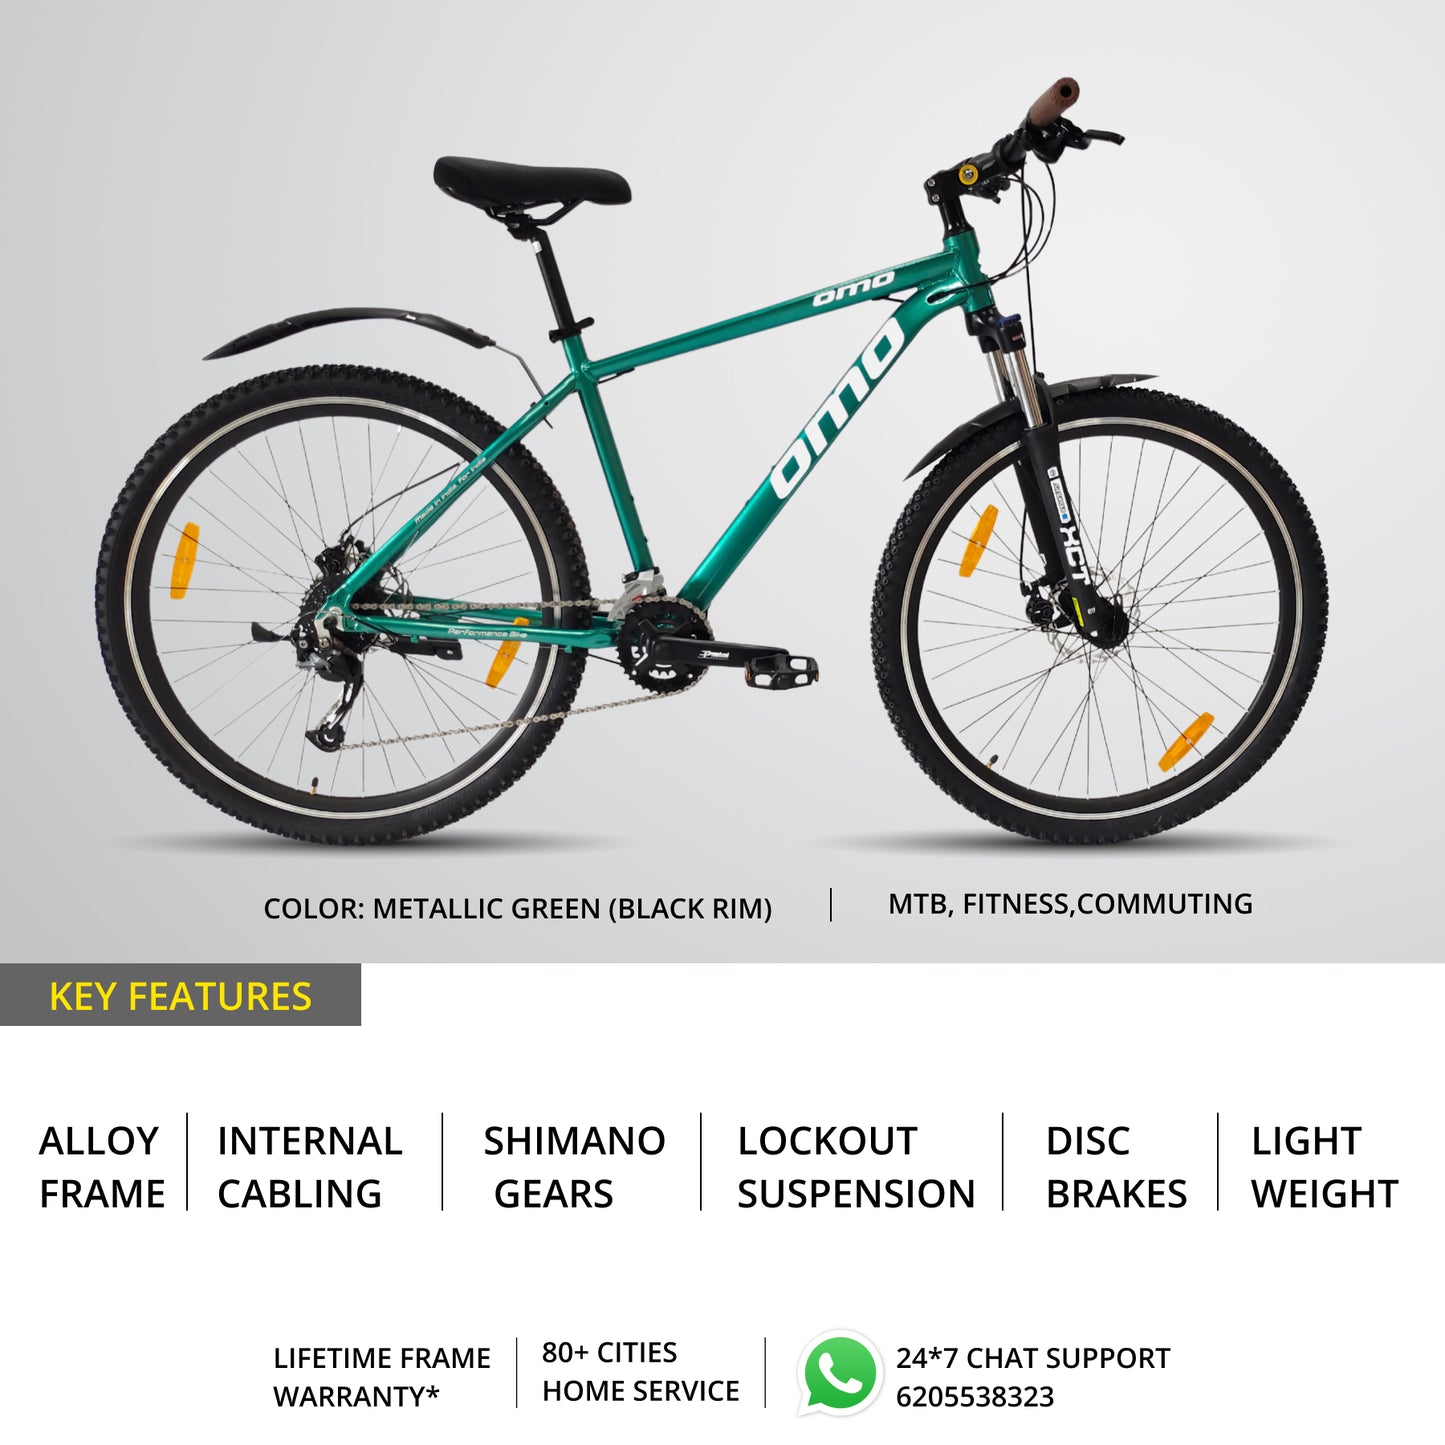 Omobikes Alloy MTB 27.5T 29T Mountain Cycle key features shimano gear lightweight hybrid bike with suspension disc brakes in metallic green custom color